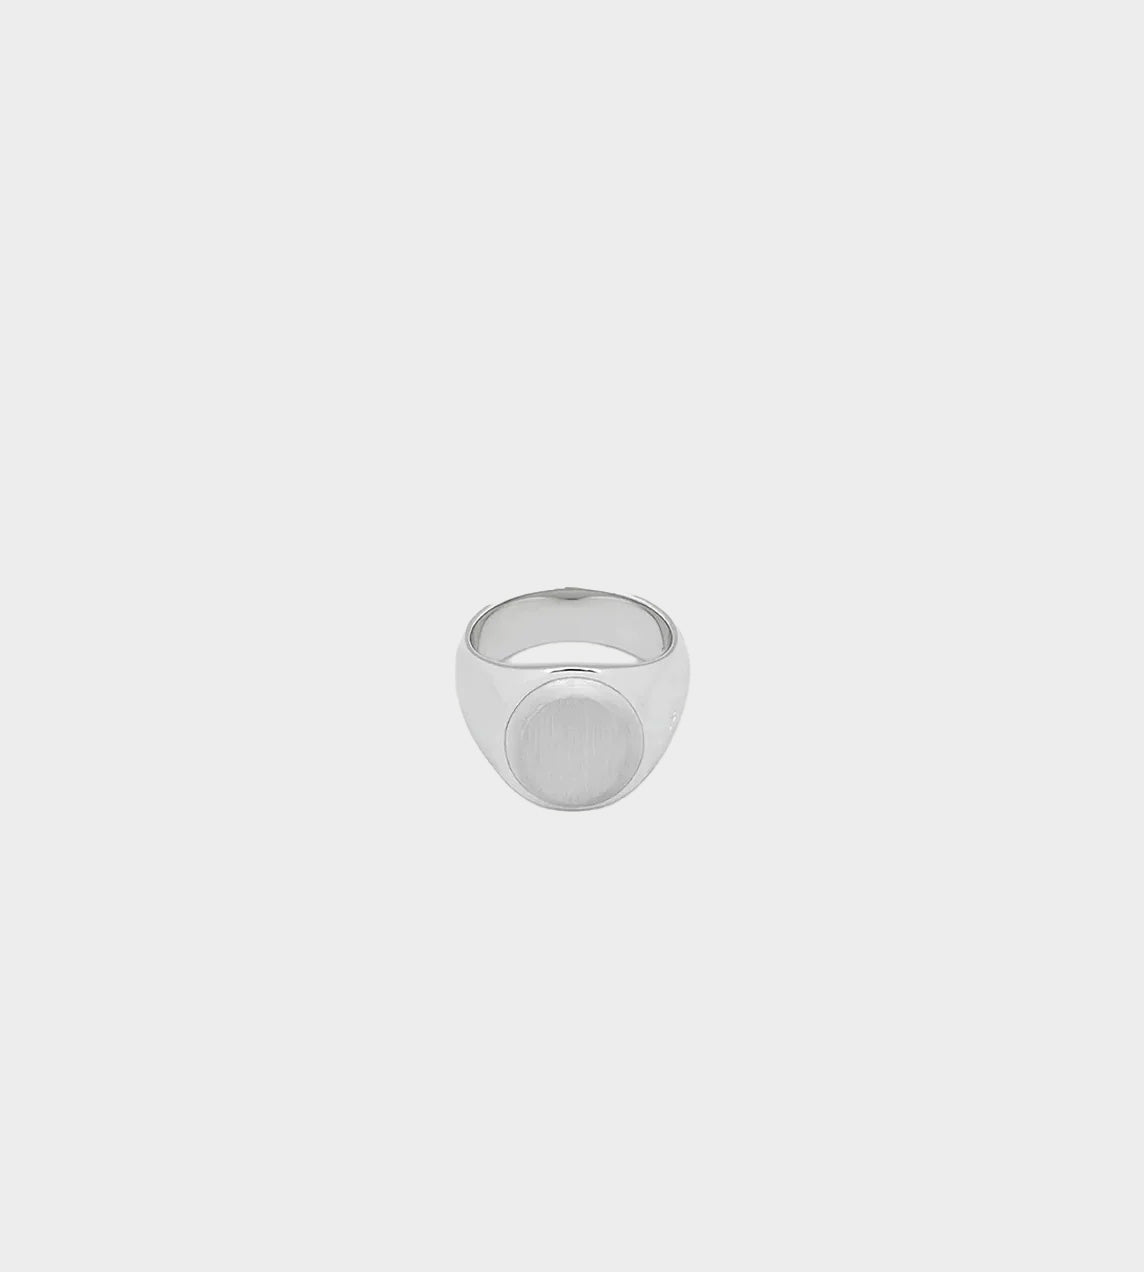 Tom Wood - Small Oval Silver Top Signet Ring